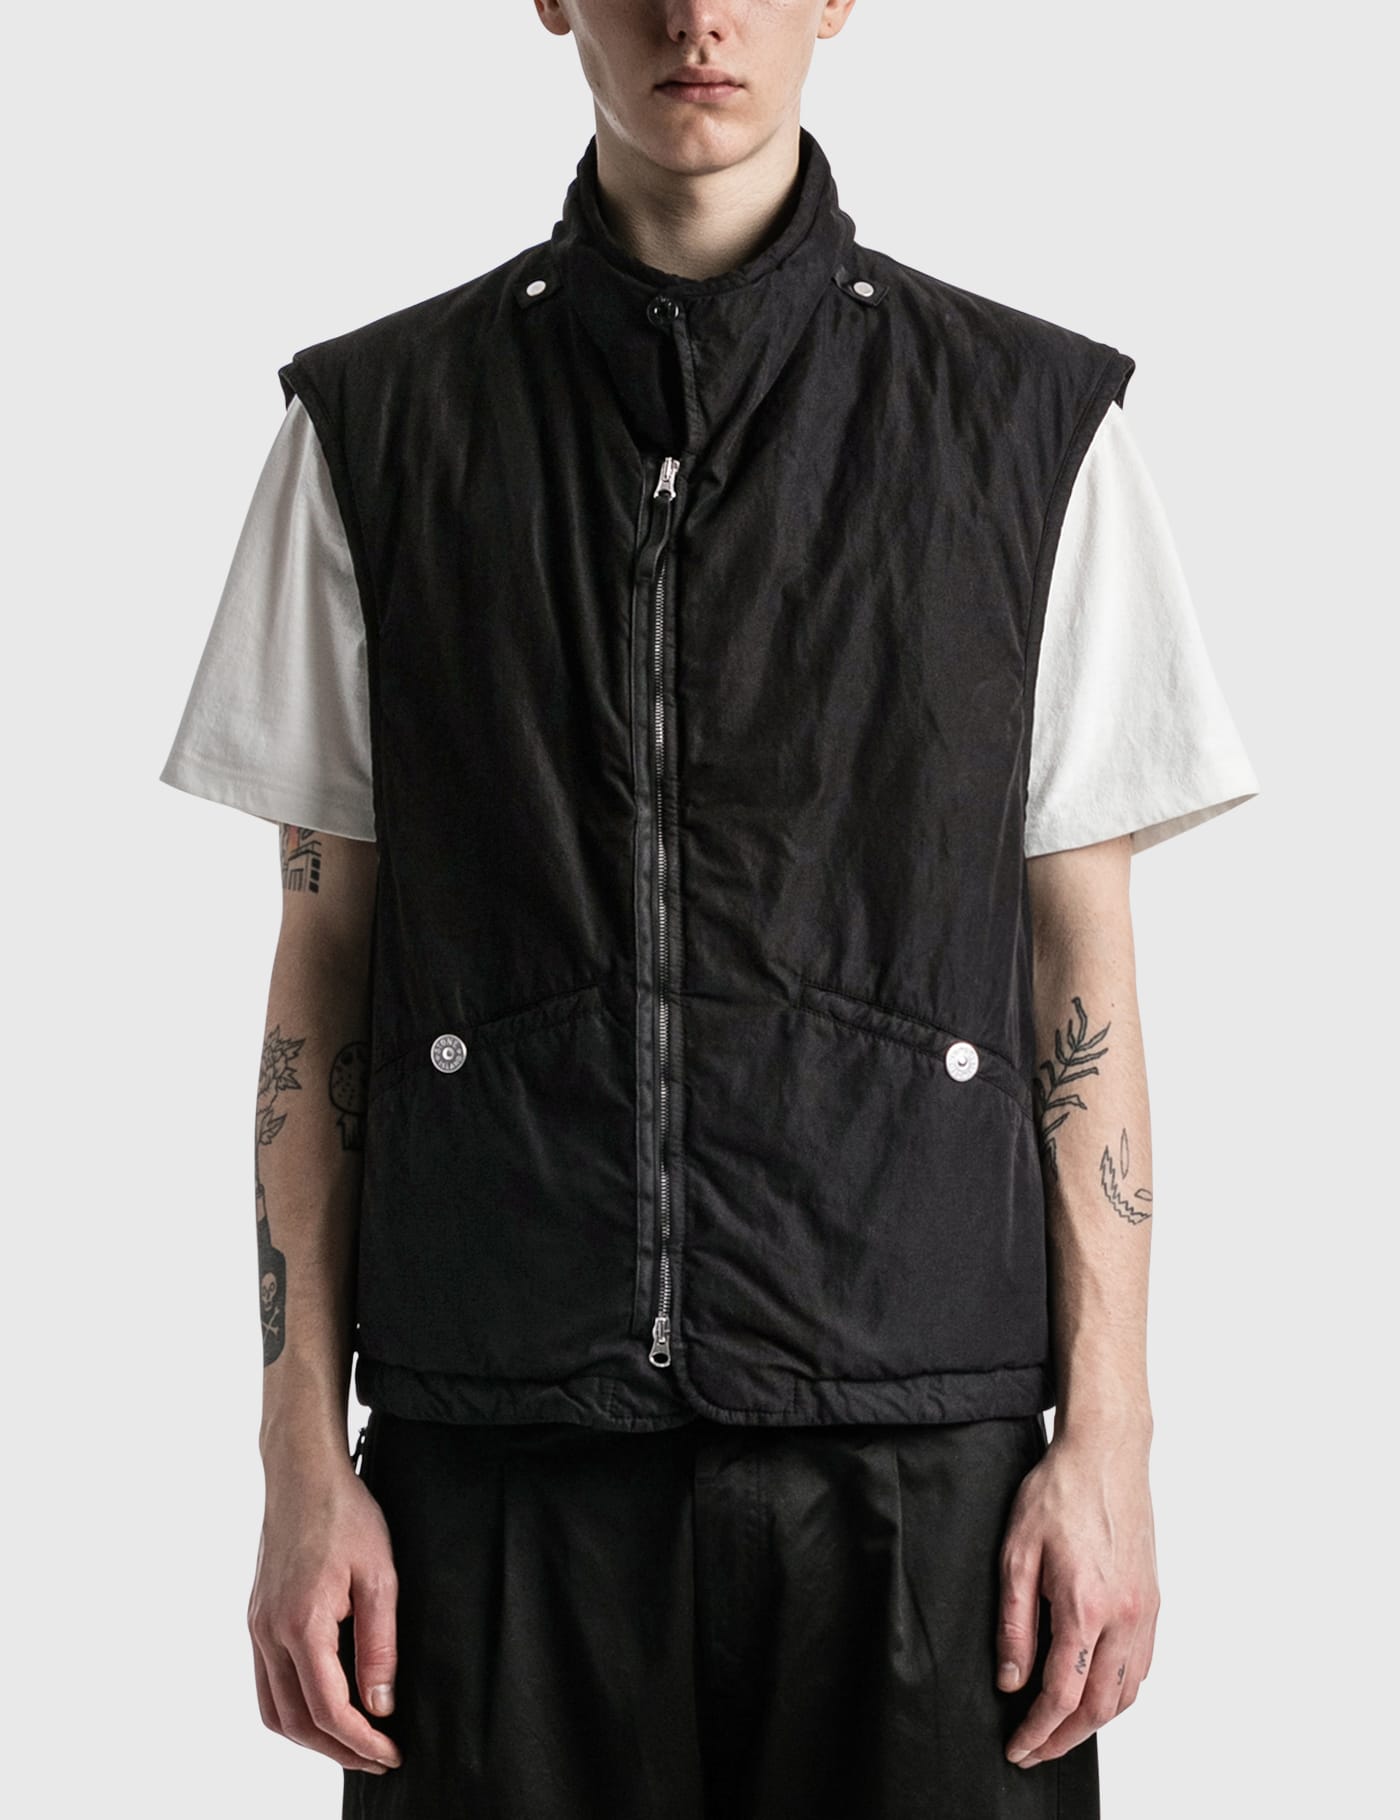 Stone Island Shadow Project - Knit Jacket | HBX - Globally Curated 